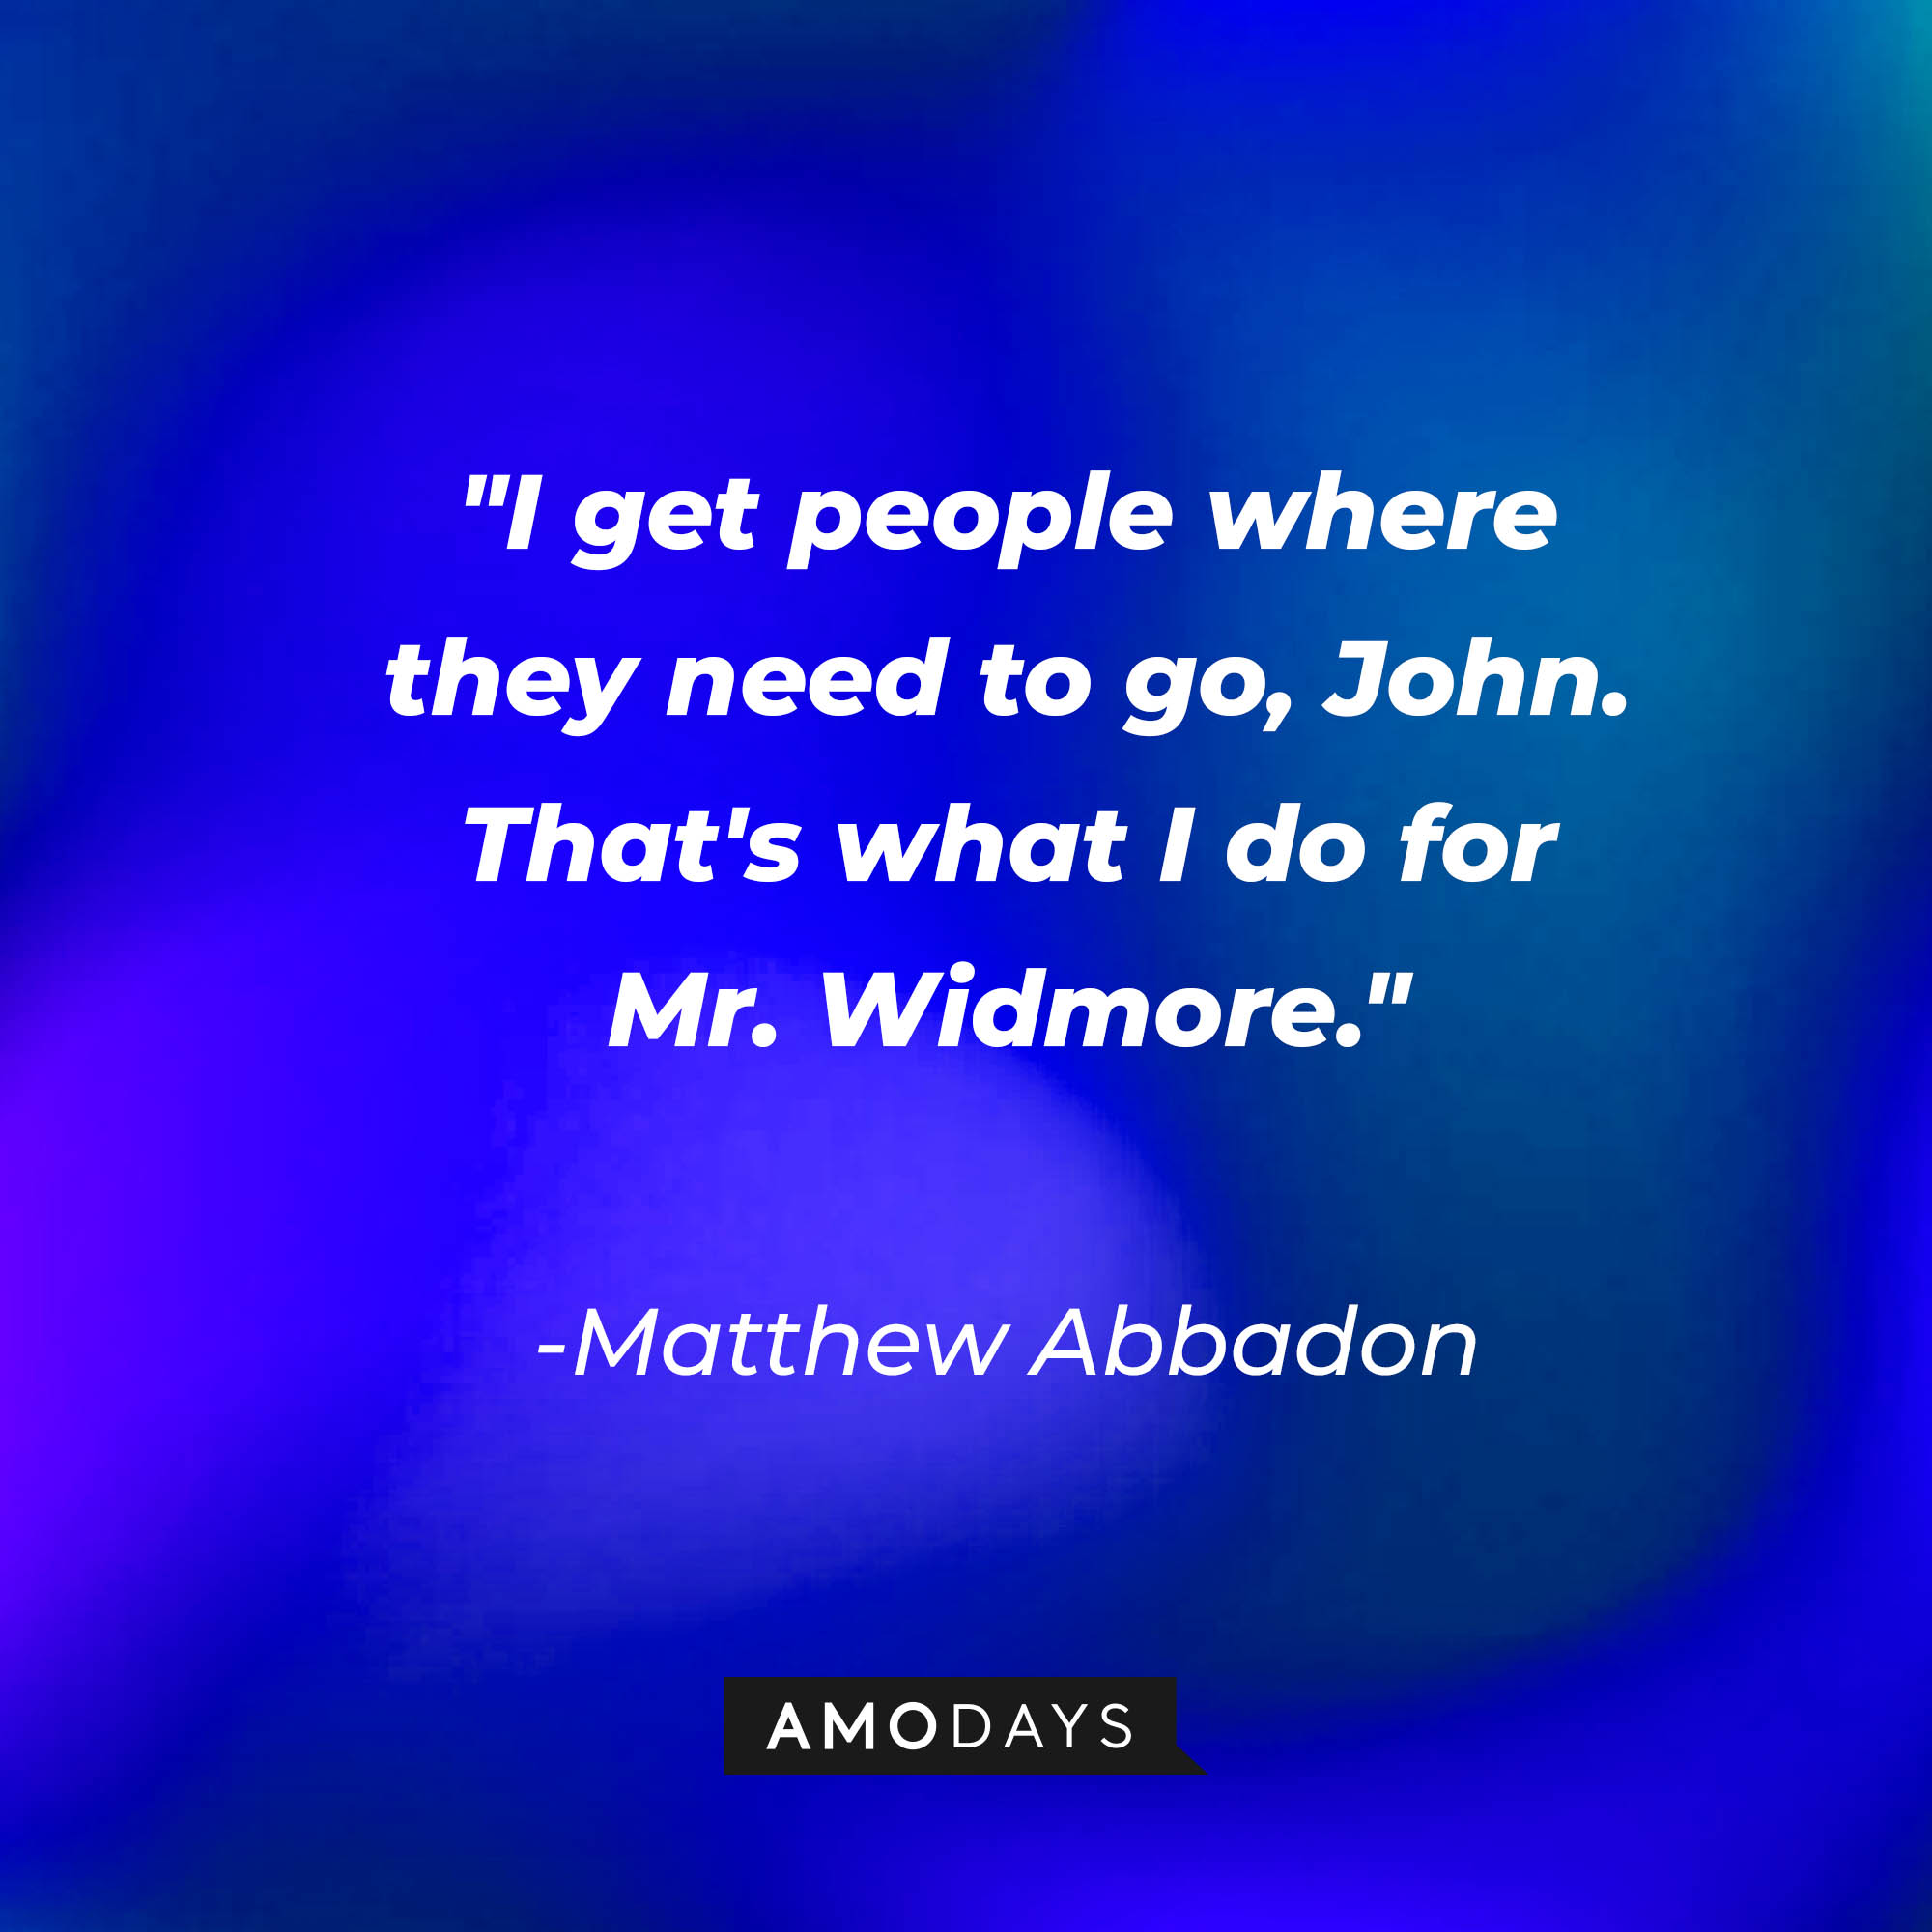 Matthew Abbadon's quote: "I get people where they need to go, John. That's what I do for Mr. Widmore." | Source: AmoDays